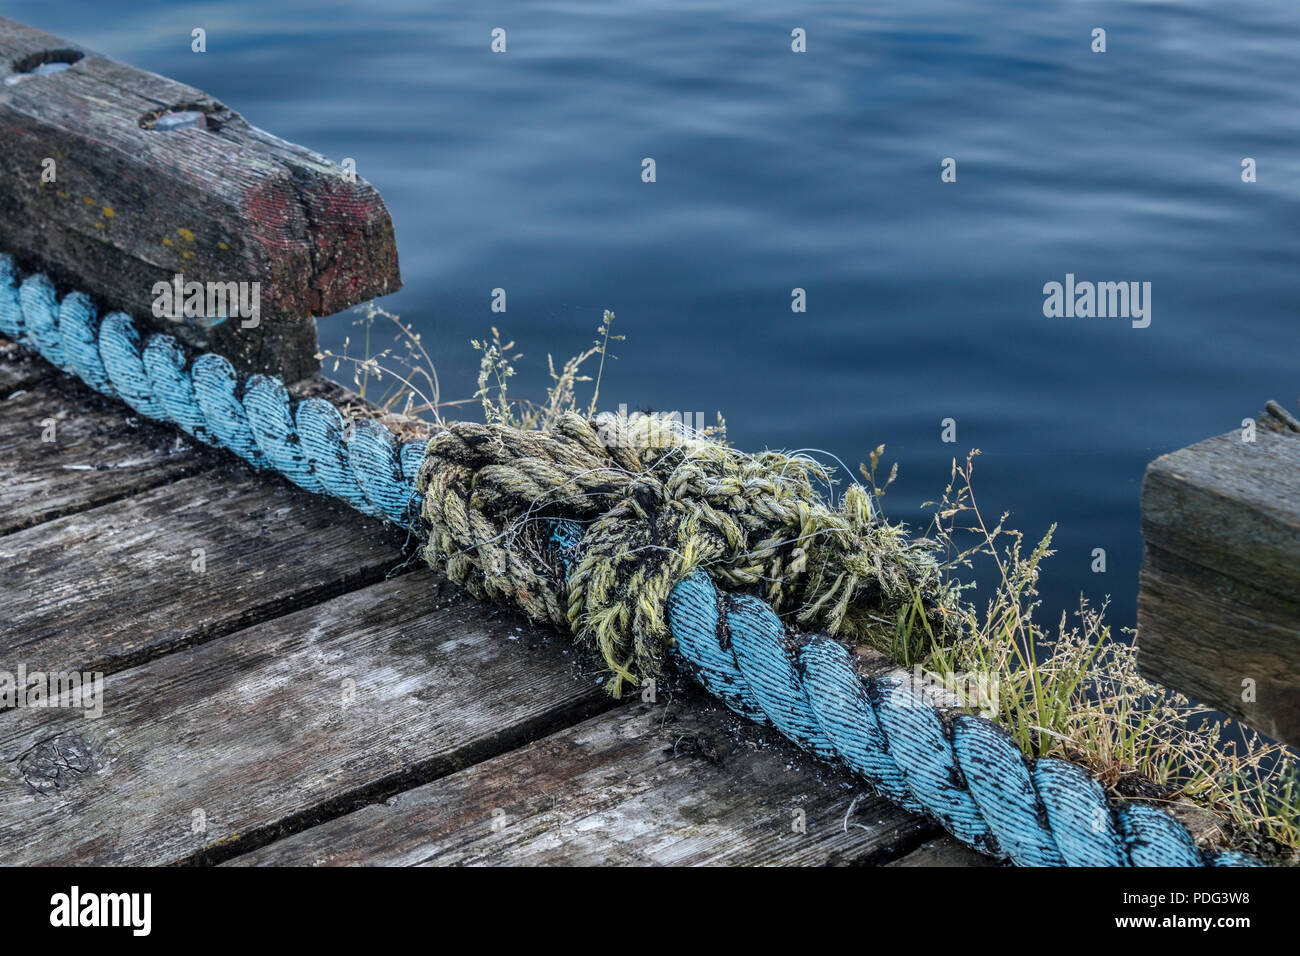 The smooth water surface contrasts with the rough textures of a weathered old wooden dock and the once-strong but now fraying ropes strung along it. Stock Photo